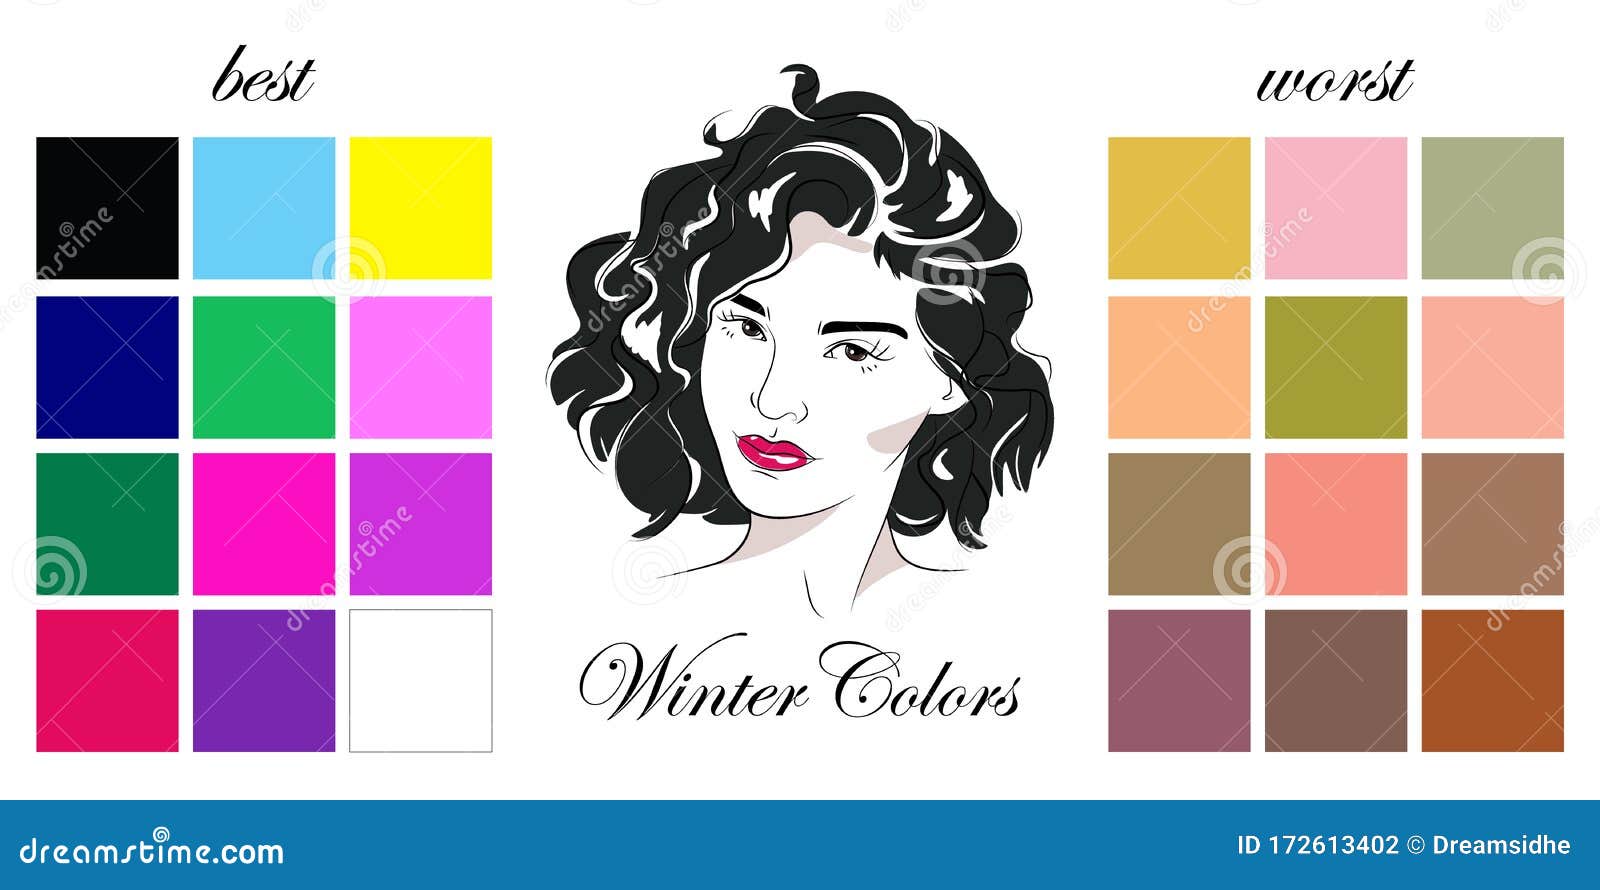 Seasonal color analysis palette with best colors Vector Image